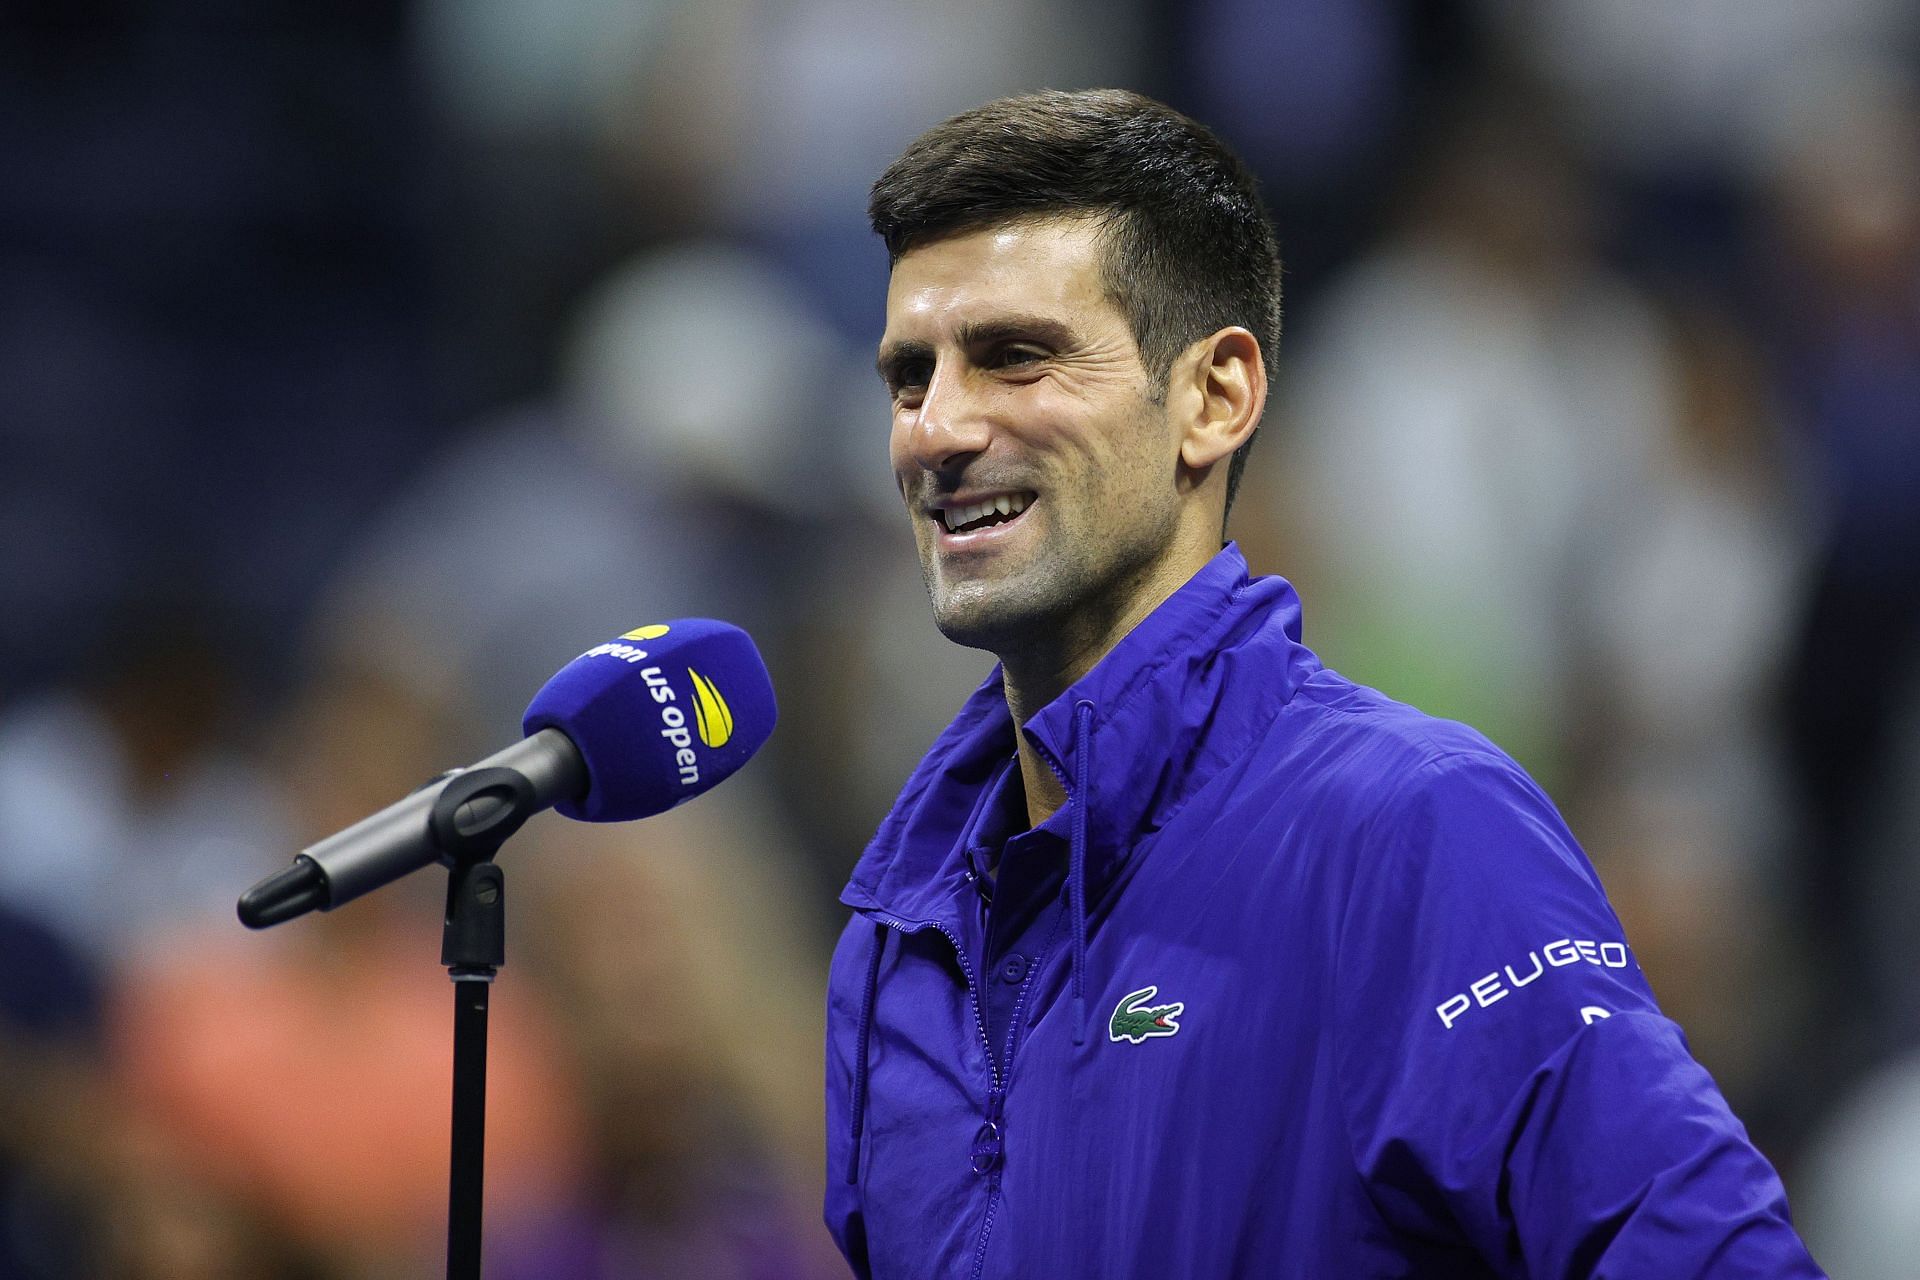 Novak Djokovic has finally confirmed that he is unvaccinated